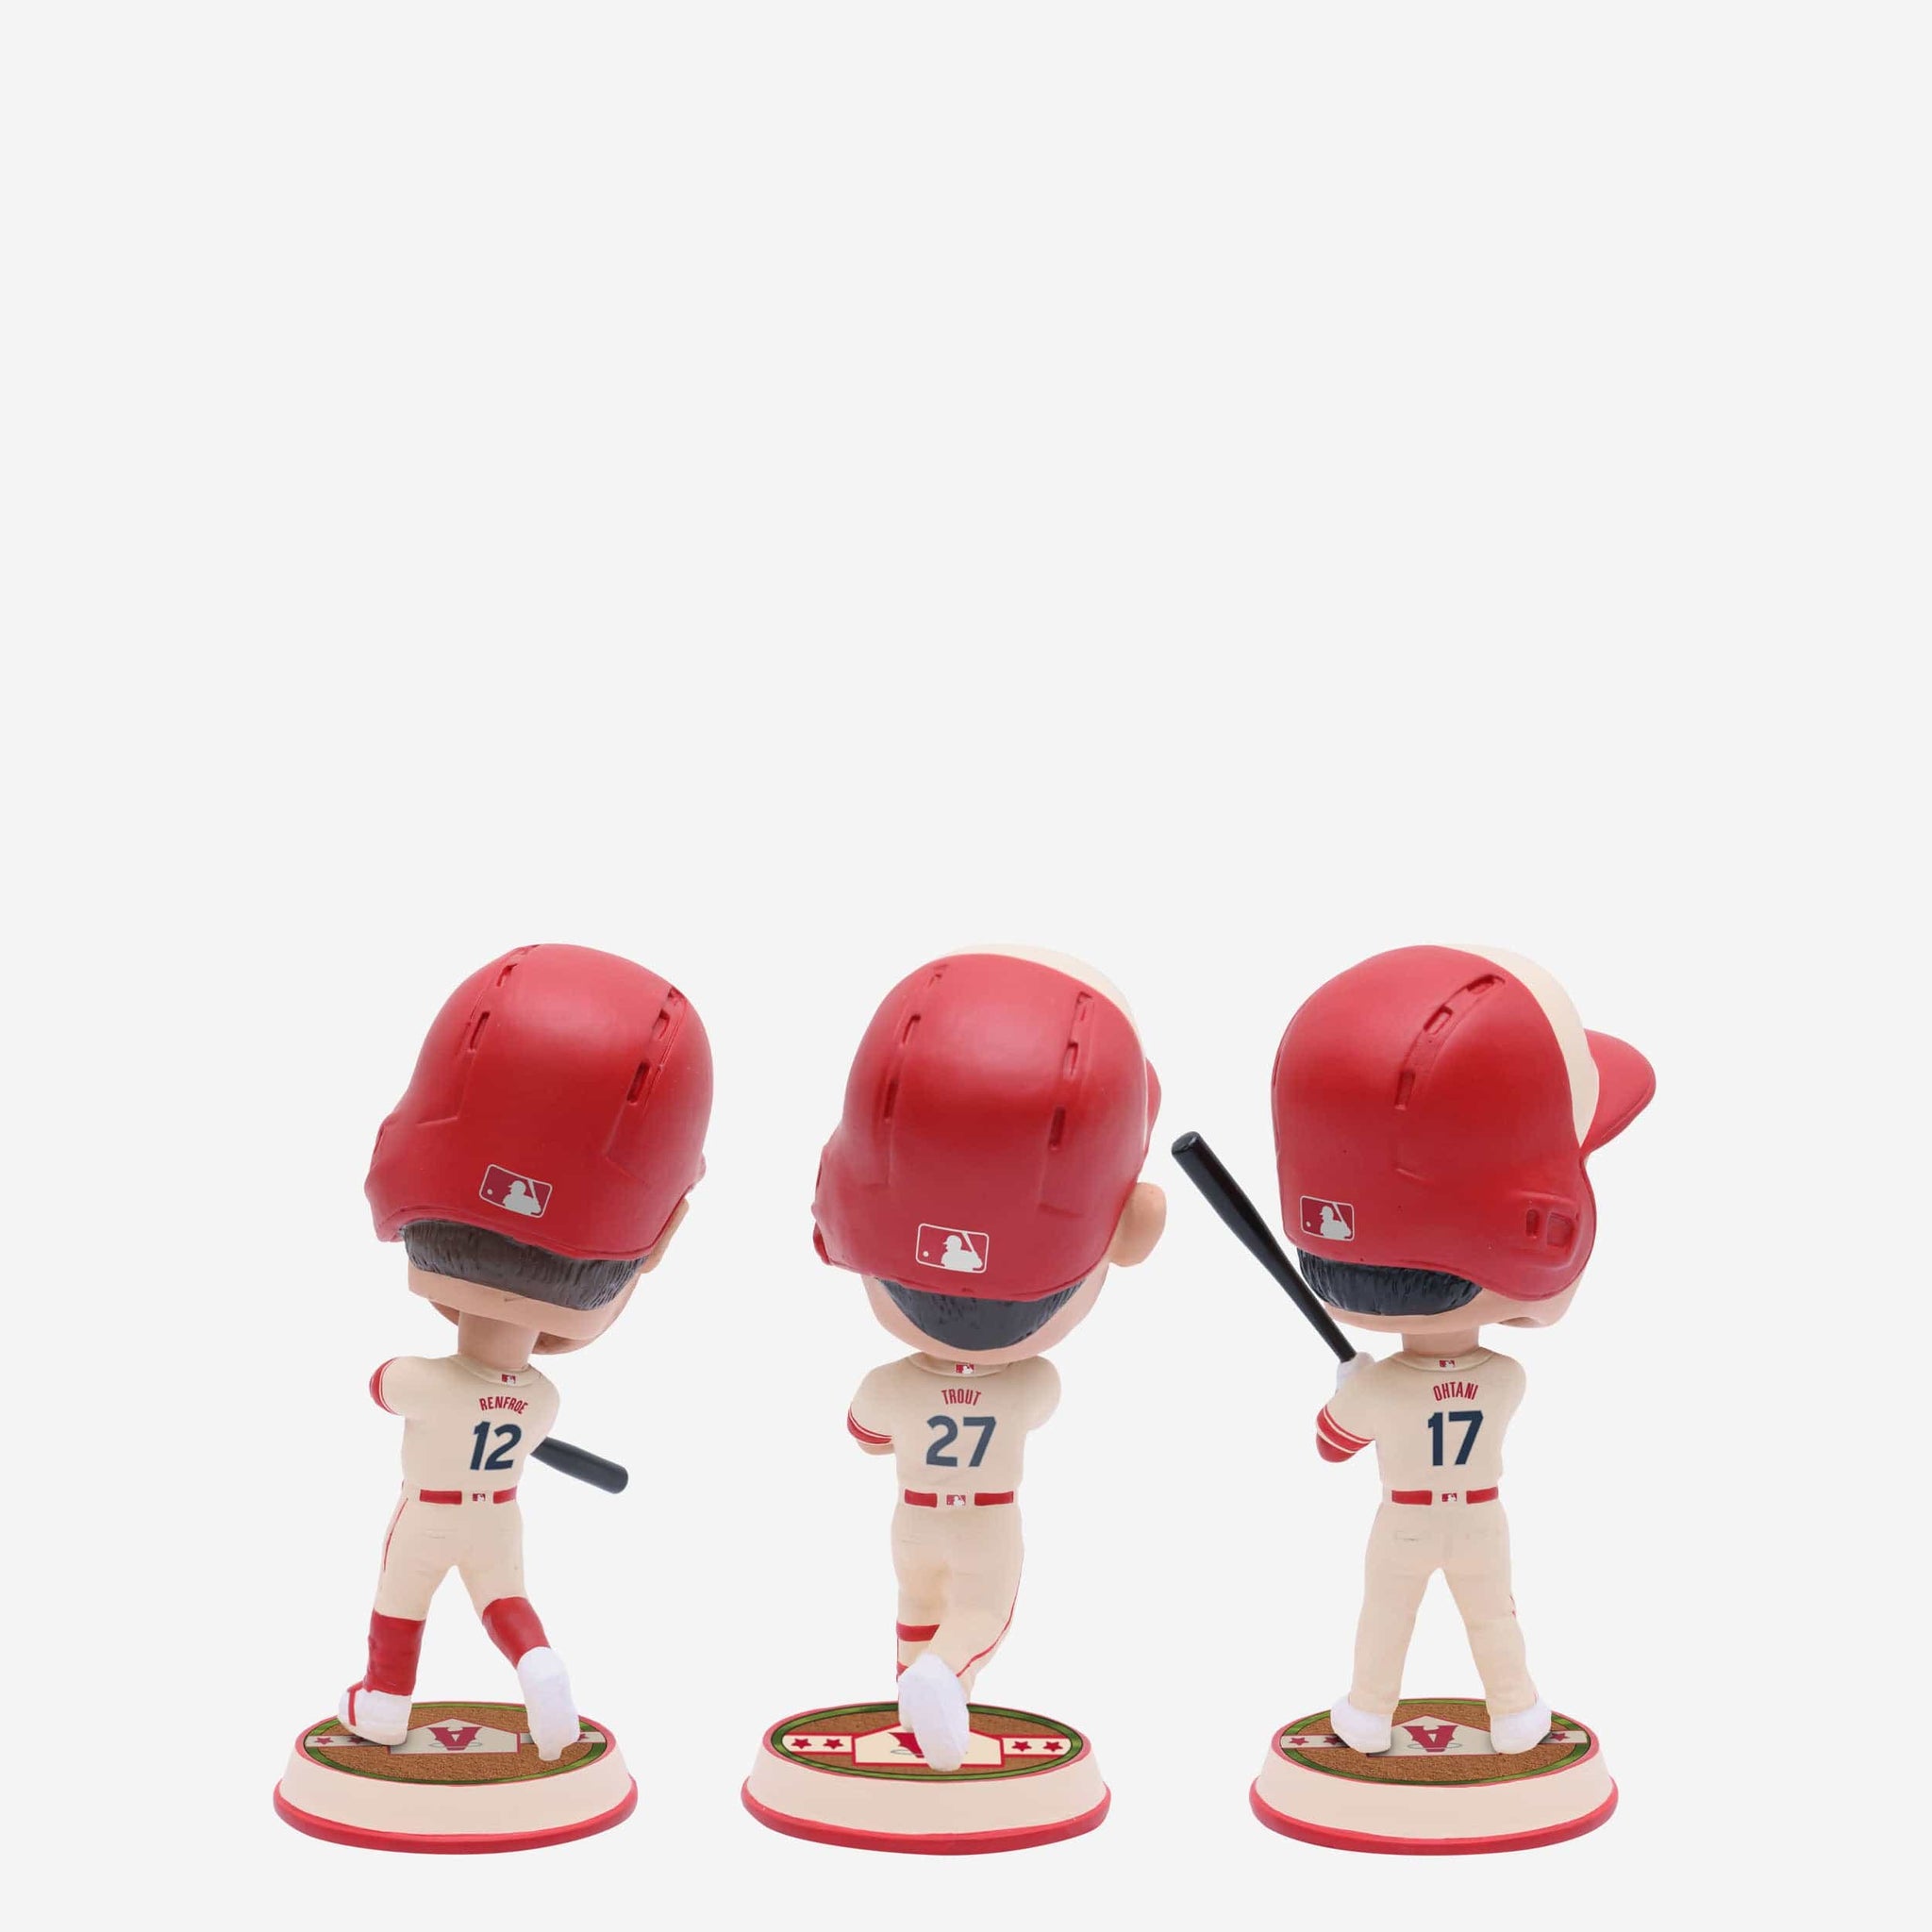 Official Los Angeles Angels Toys, Angels Games, Figurines, Teddy Bears